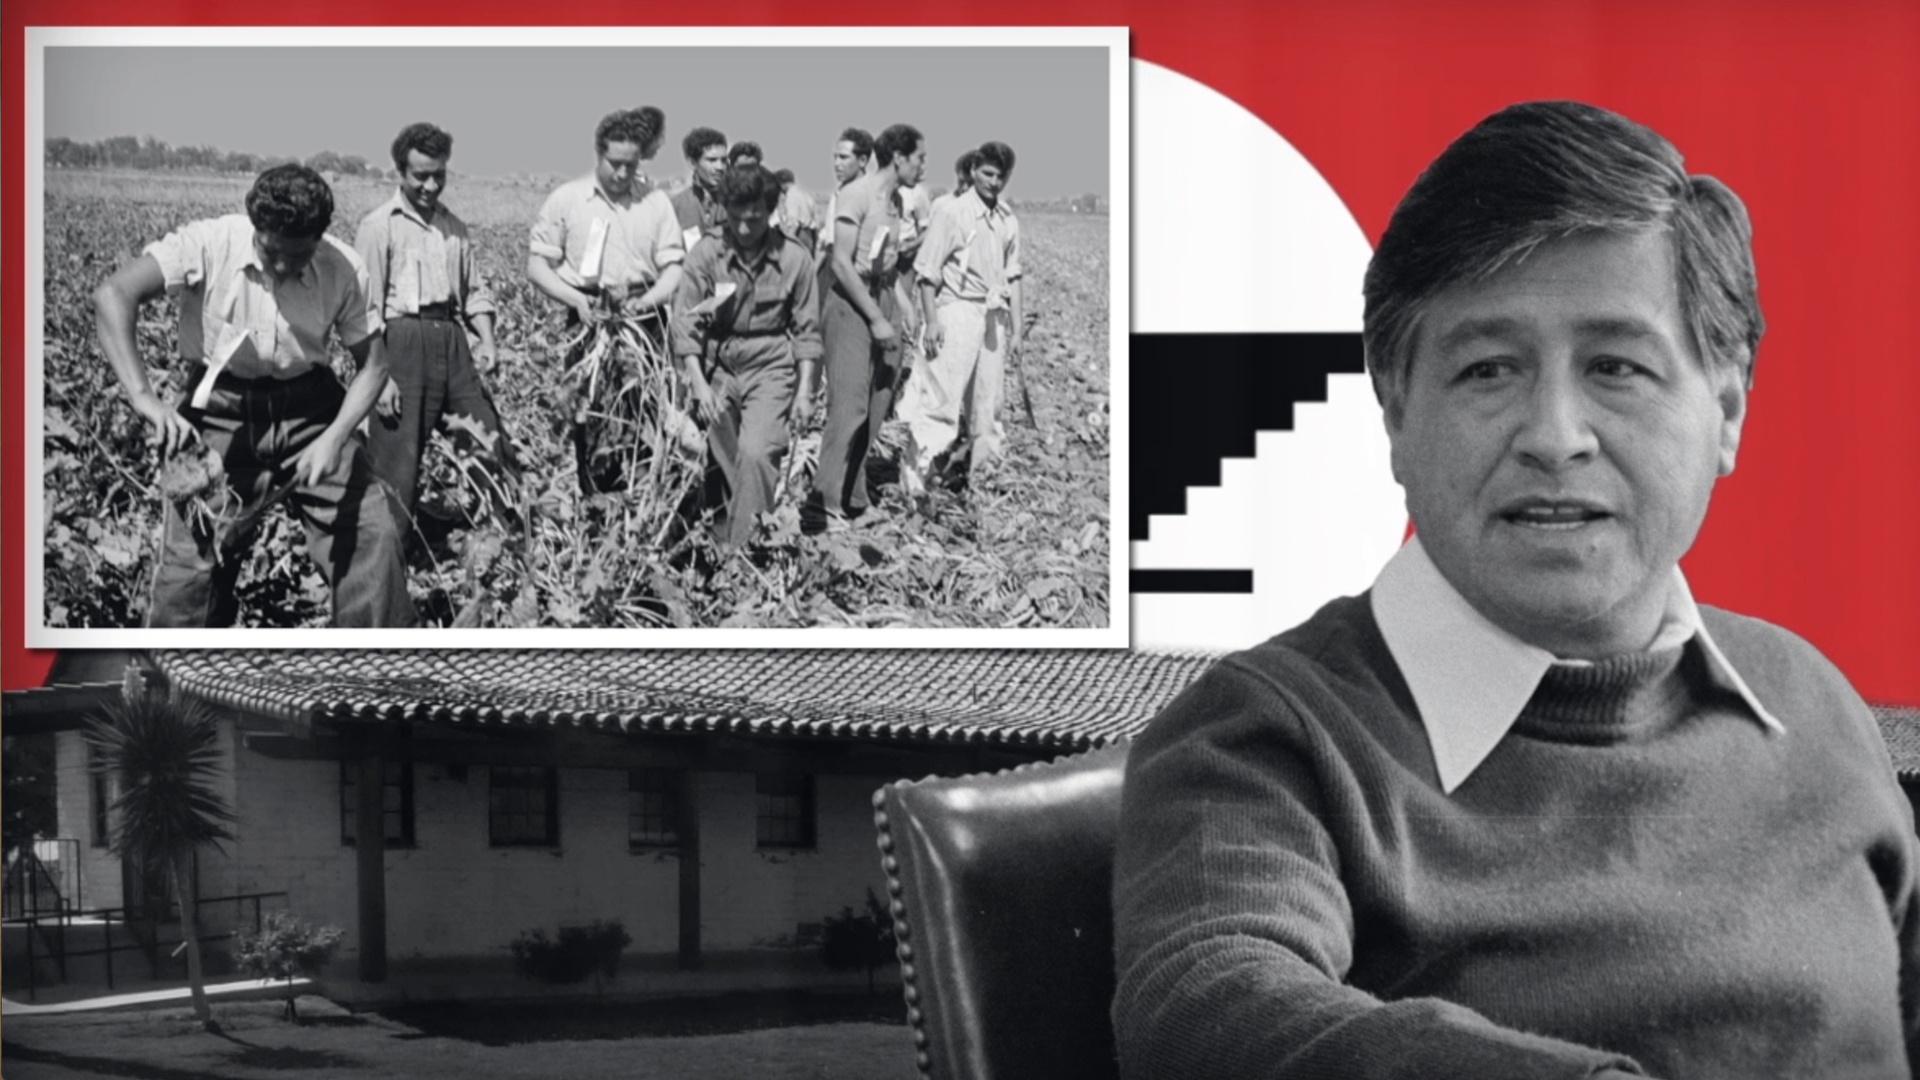 Cesar Chavez | Labor Leader and Civil Rights Activist Video | PBS LearningMedia